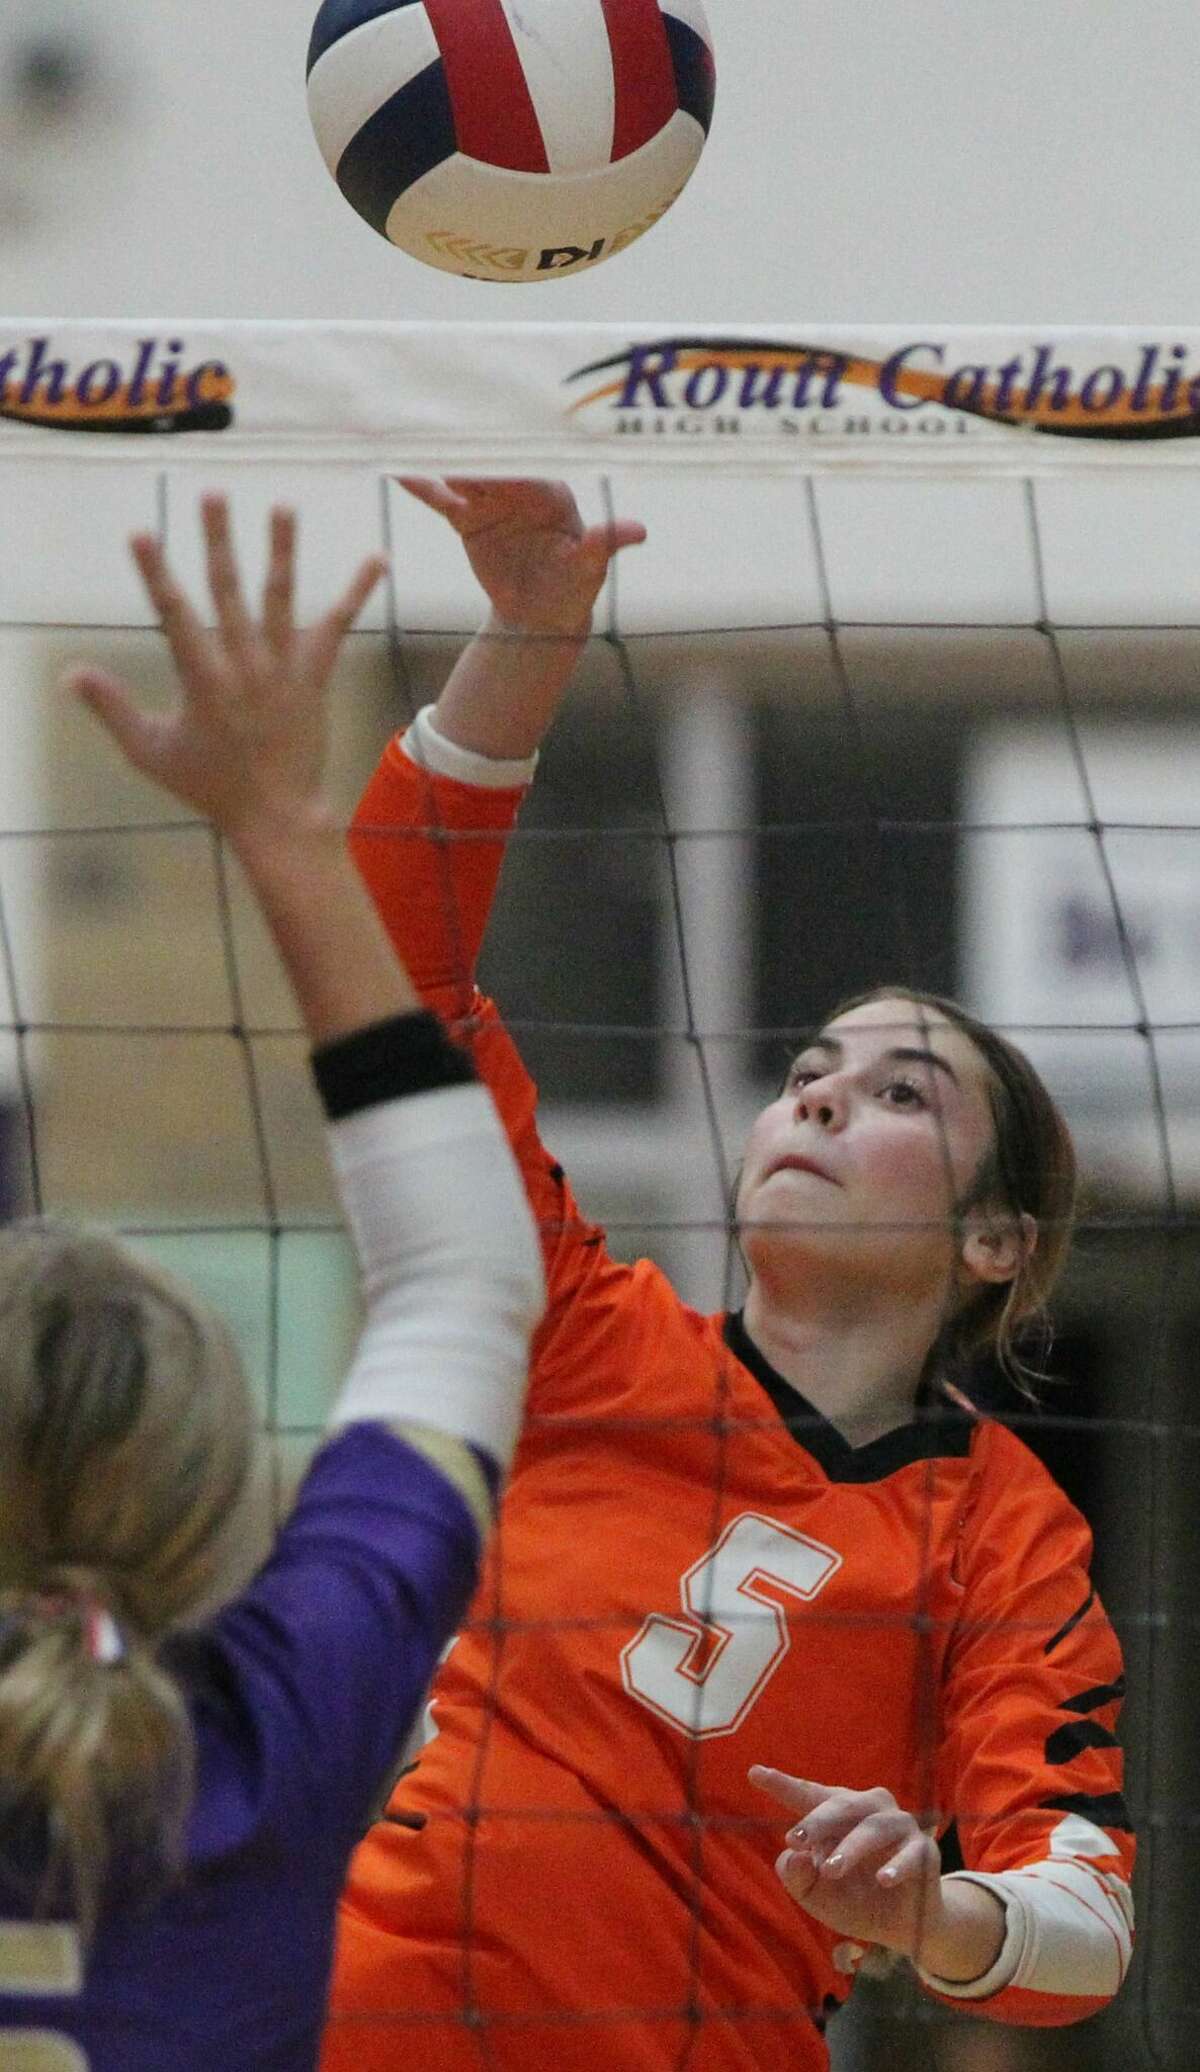 Action from the South County volleyball team's win over Routt Tuesday night at the Routt Dome in Jacksonville